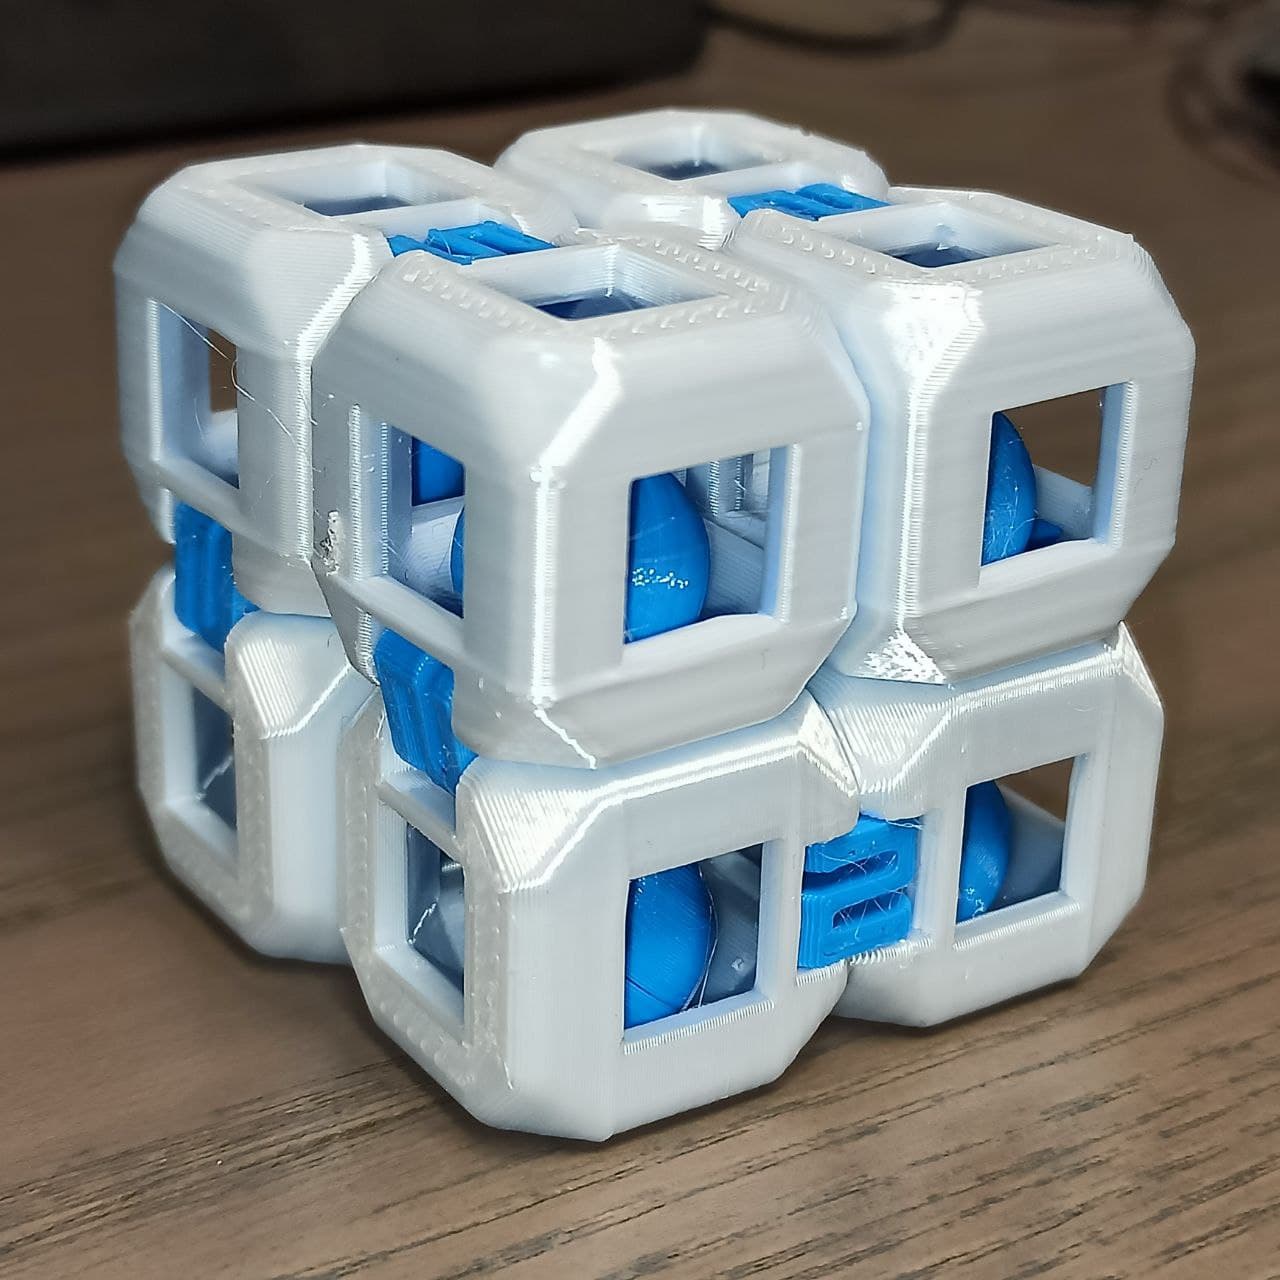 Infinity Cube with balls inside